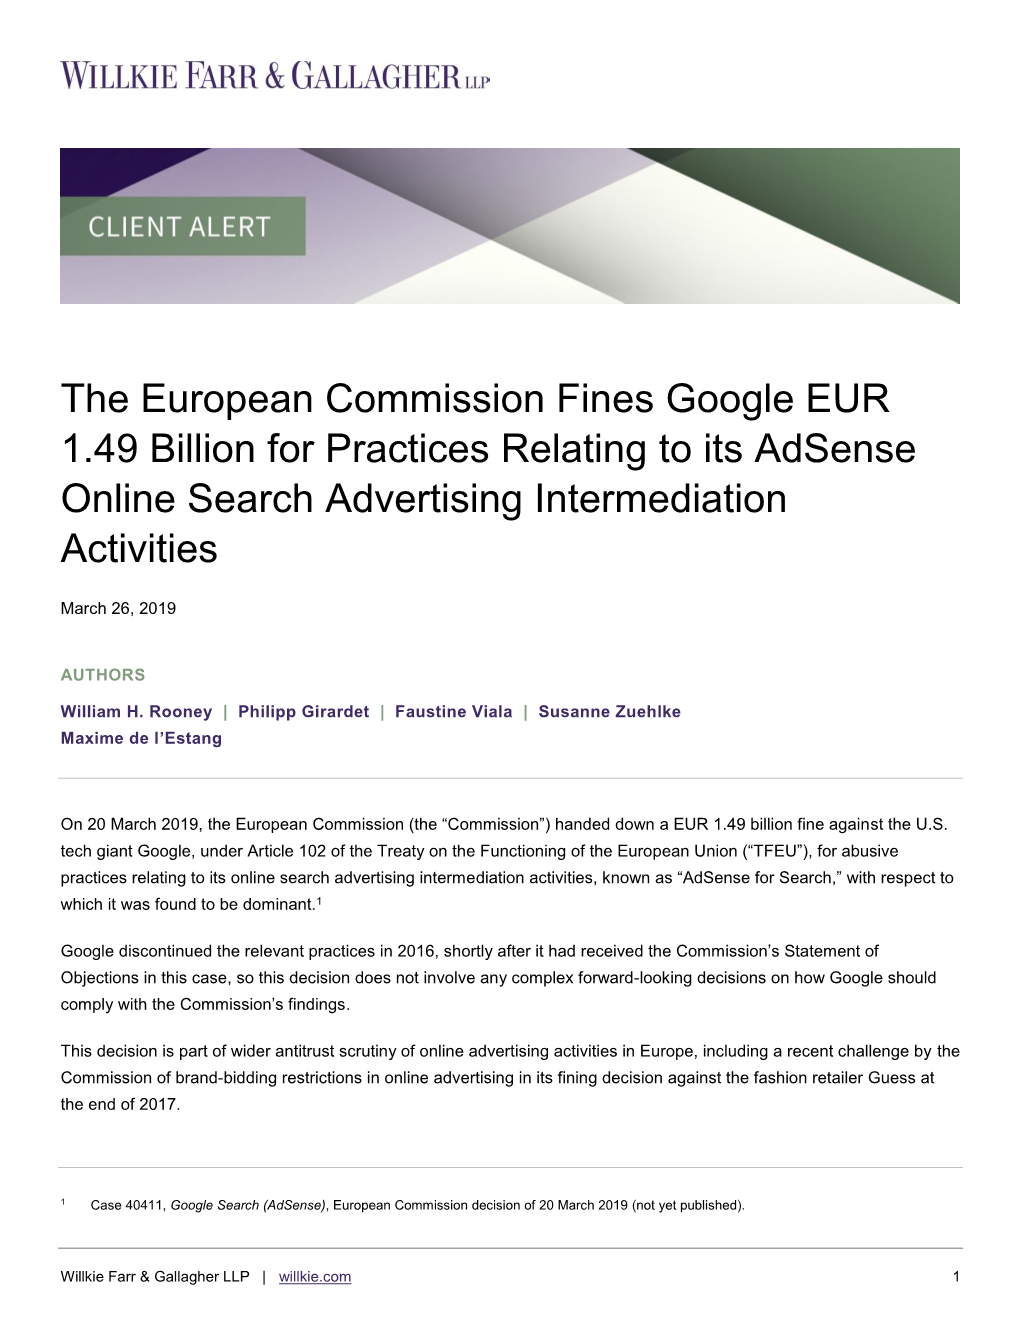 The European Commission Fines Google EUR 1.49 Billion for Practices Relating to Its Adsense Online Search Advertising Intermediation Activities